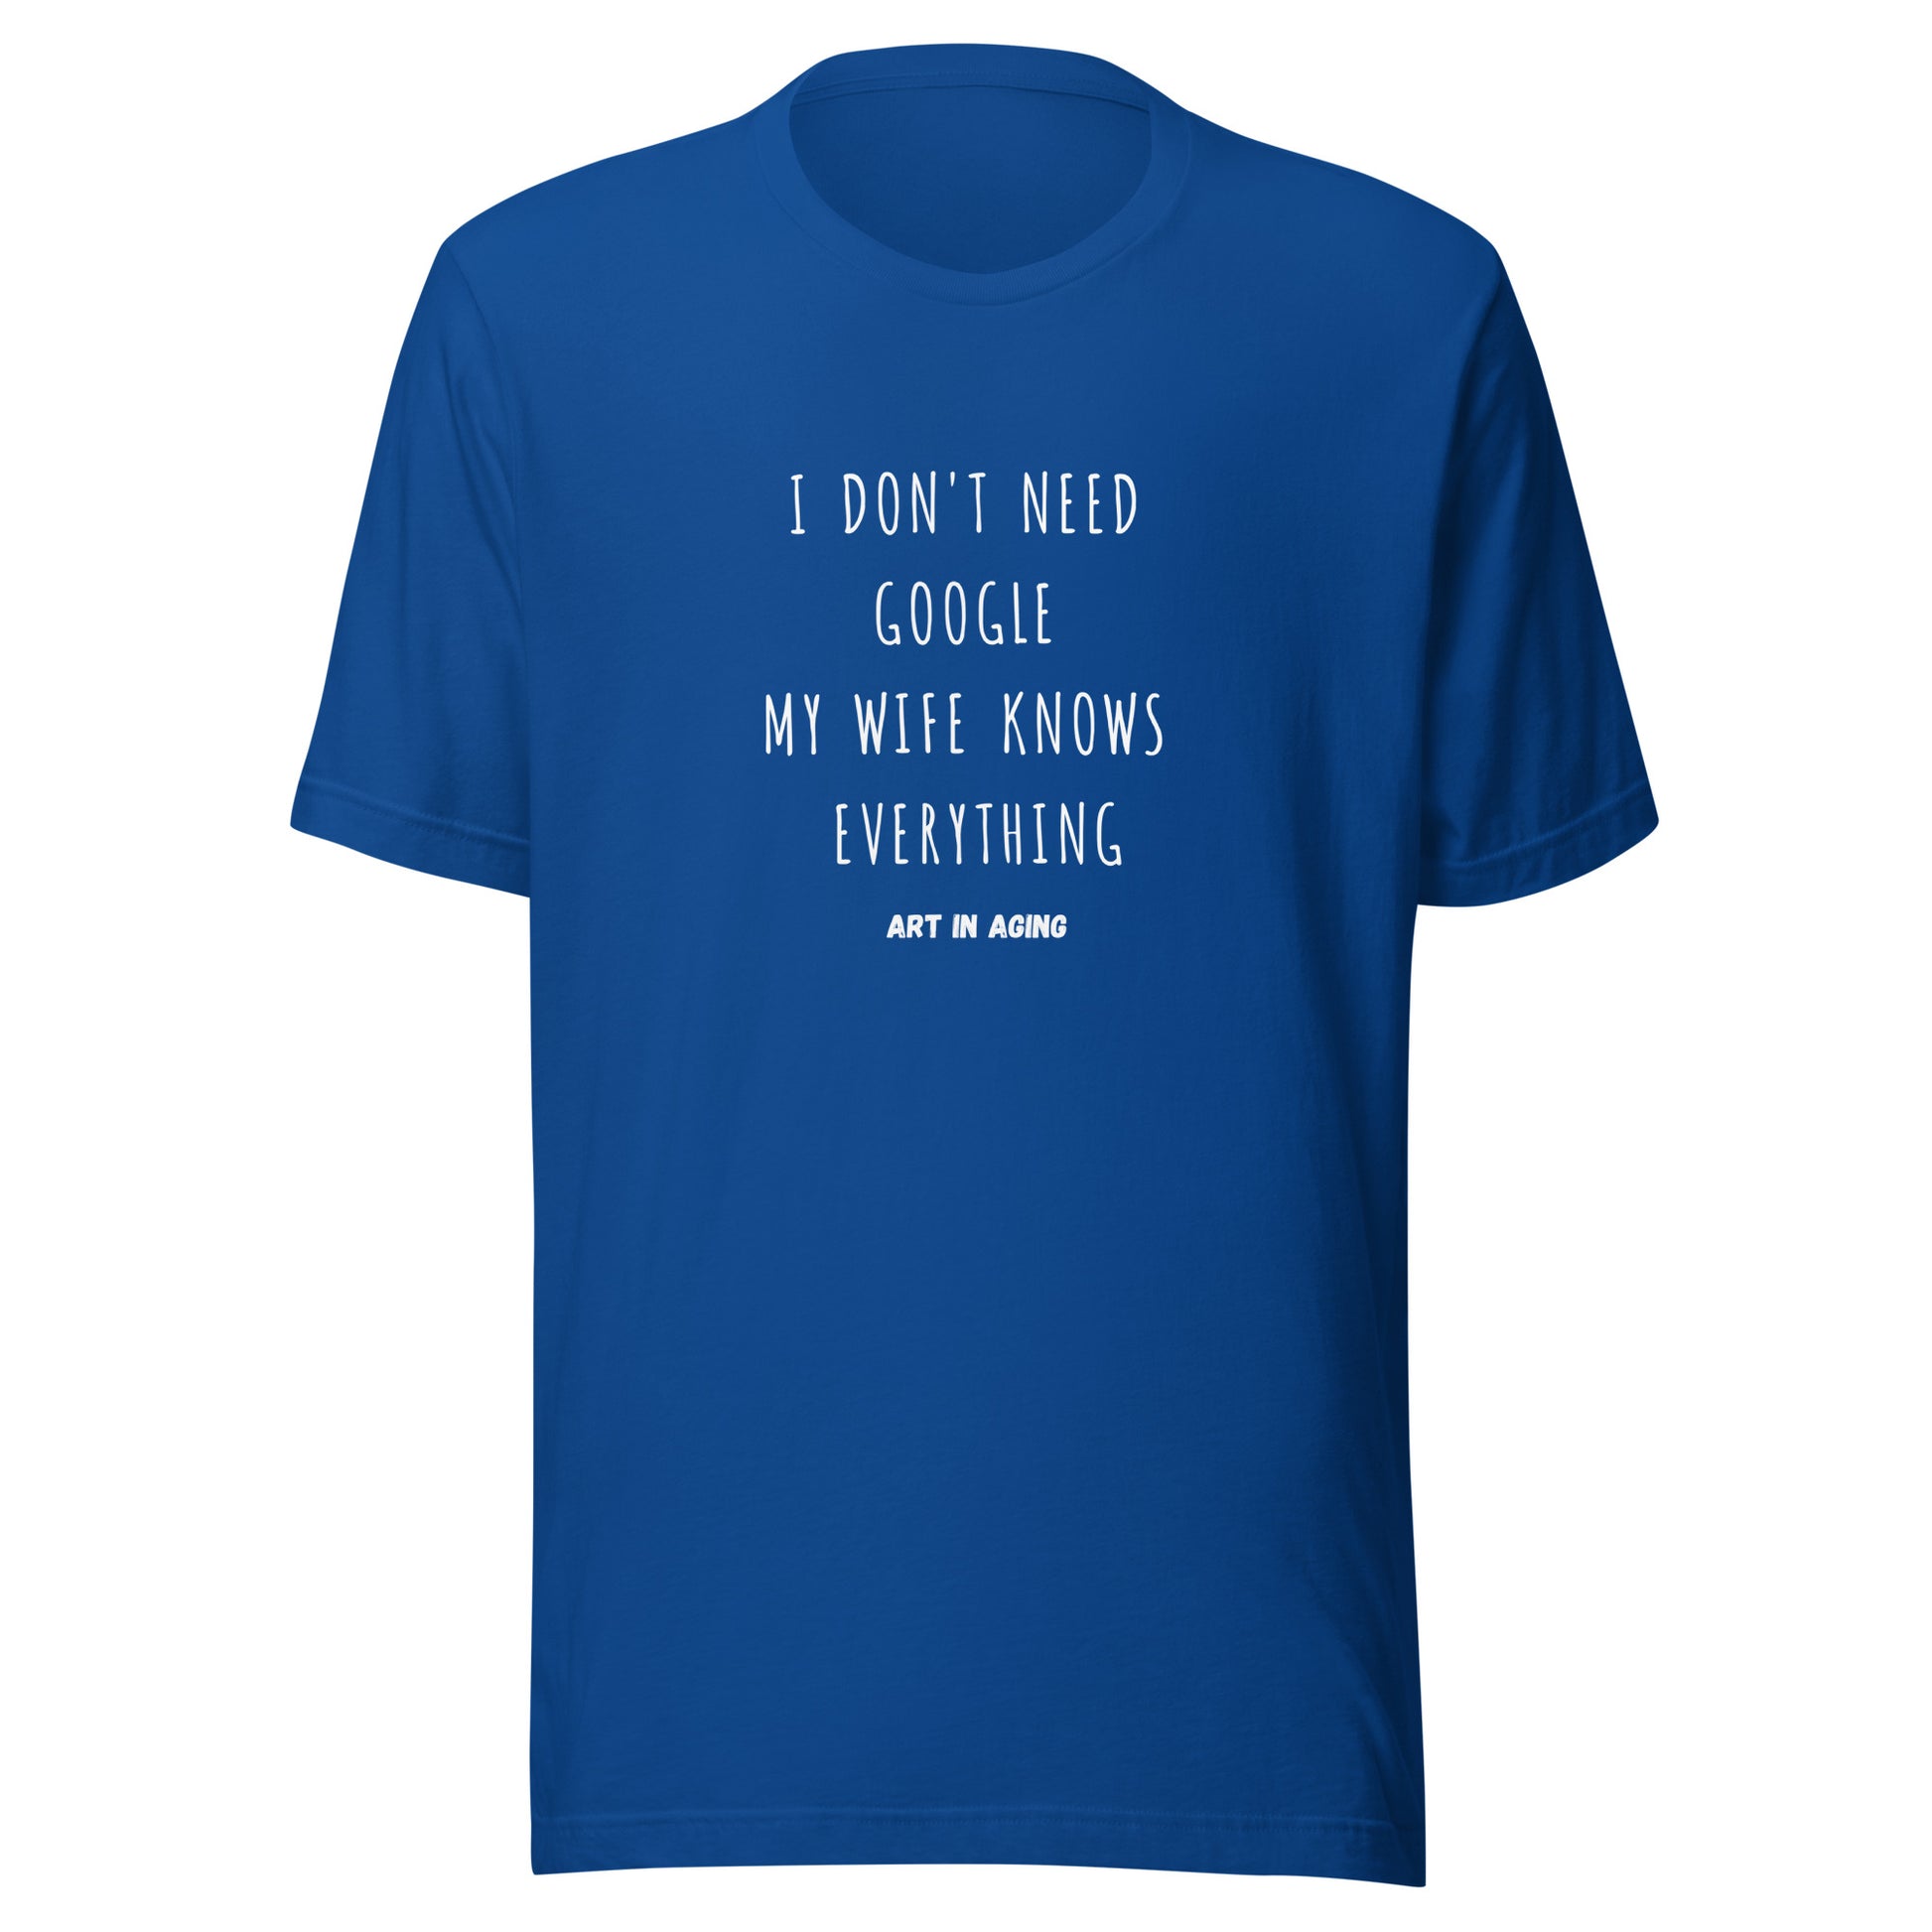 I Don't Need Google My Wife Knows Everything T-Shirt | Art in Aging